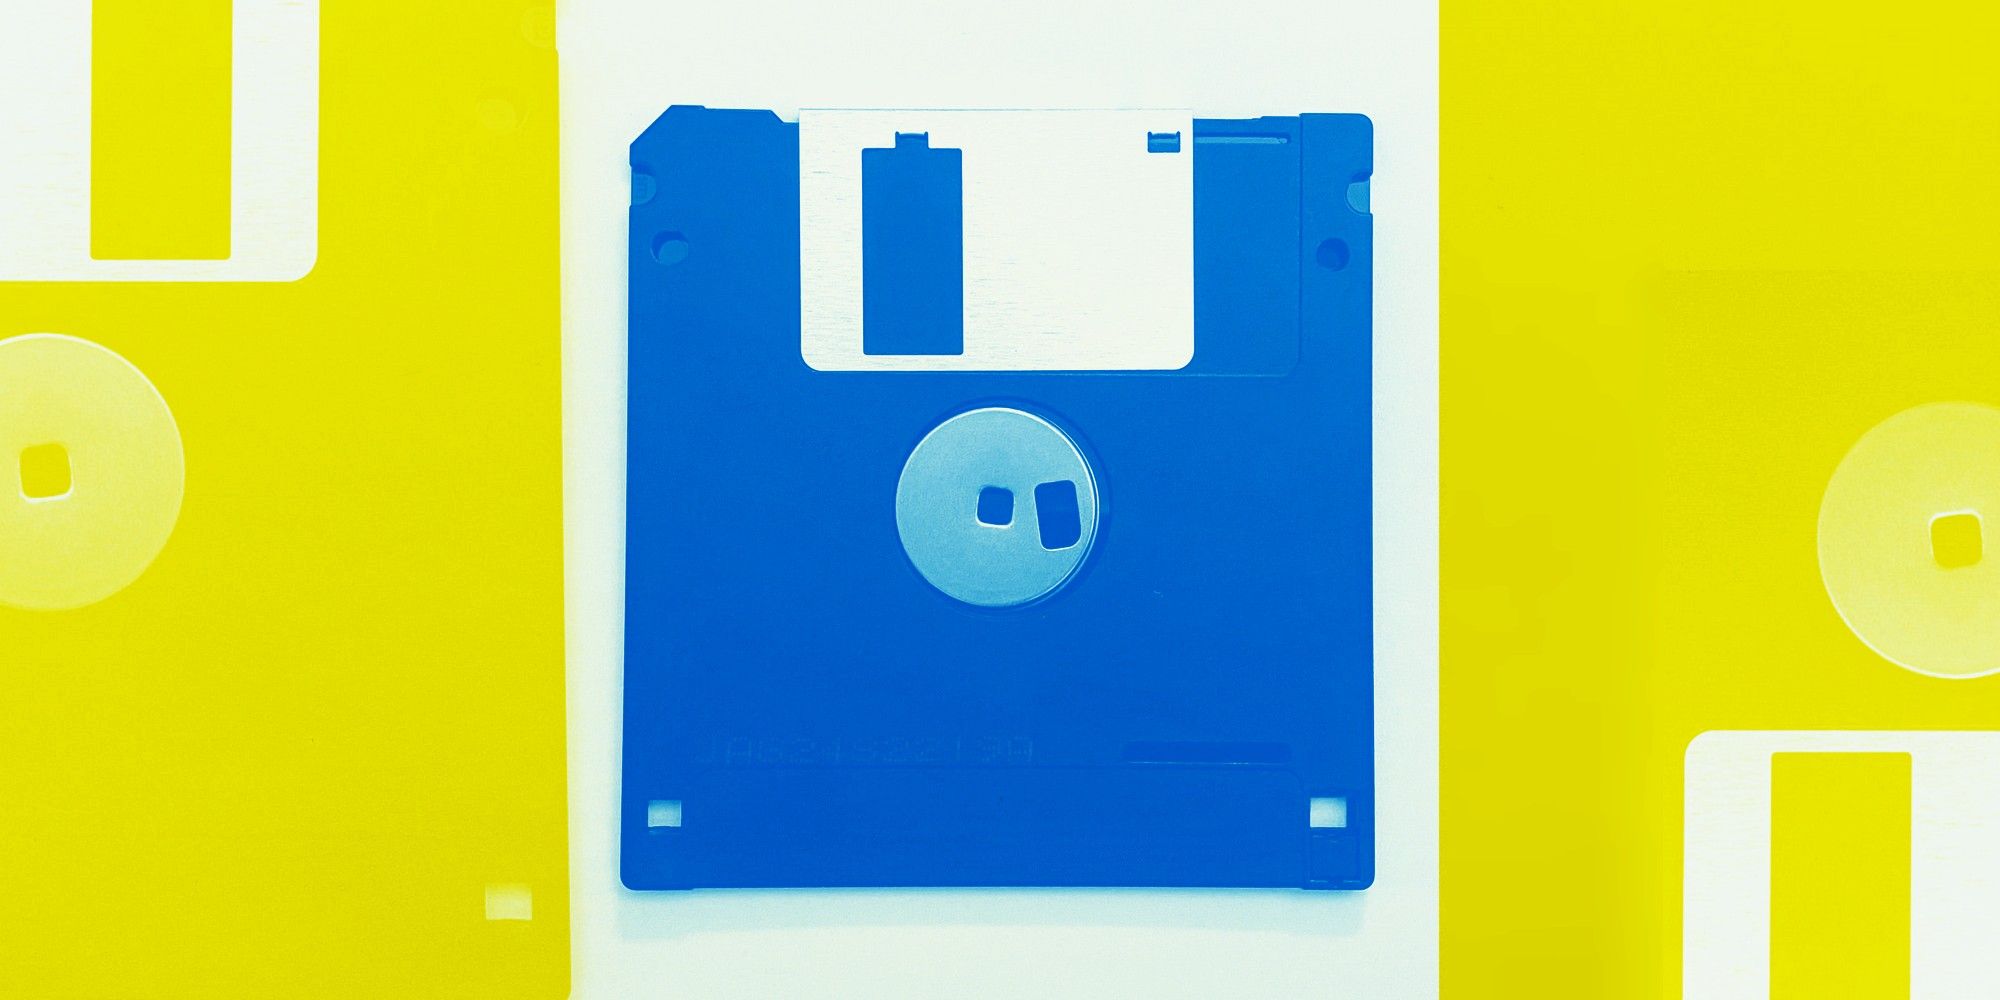 Japan is finally saying goodbye to the floppy disks